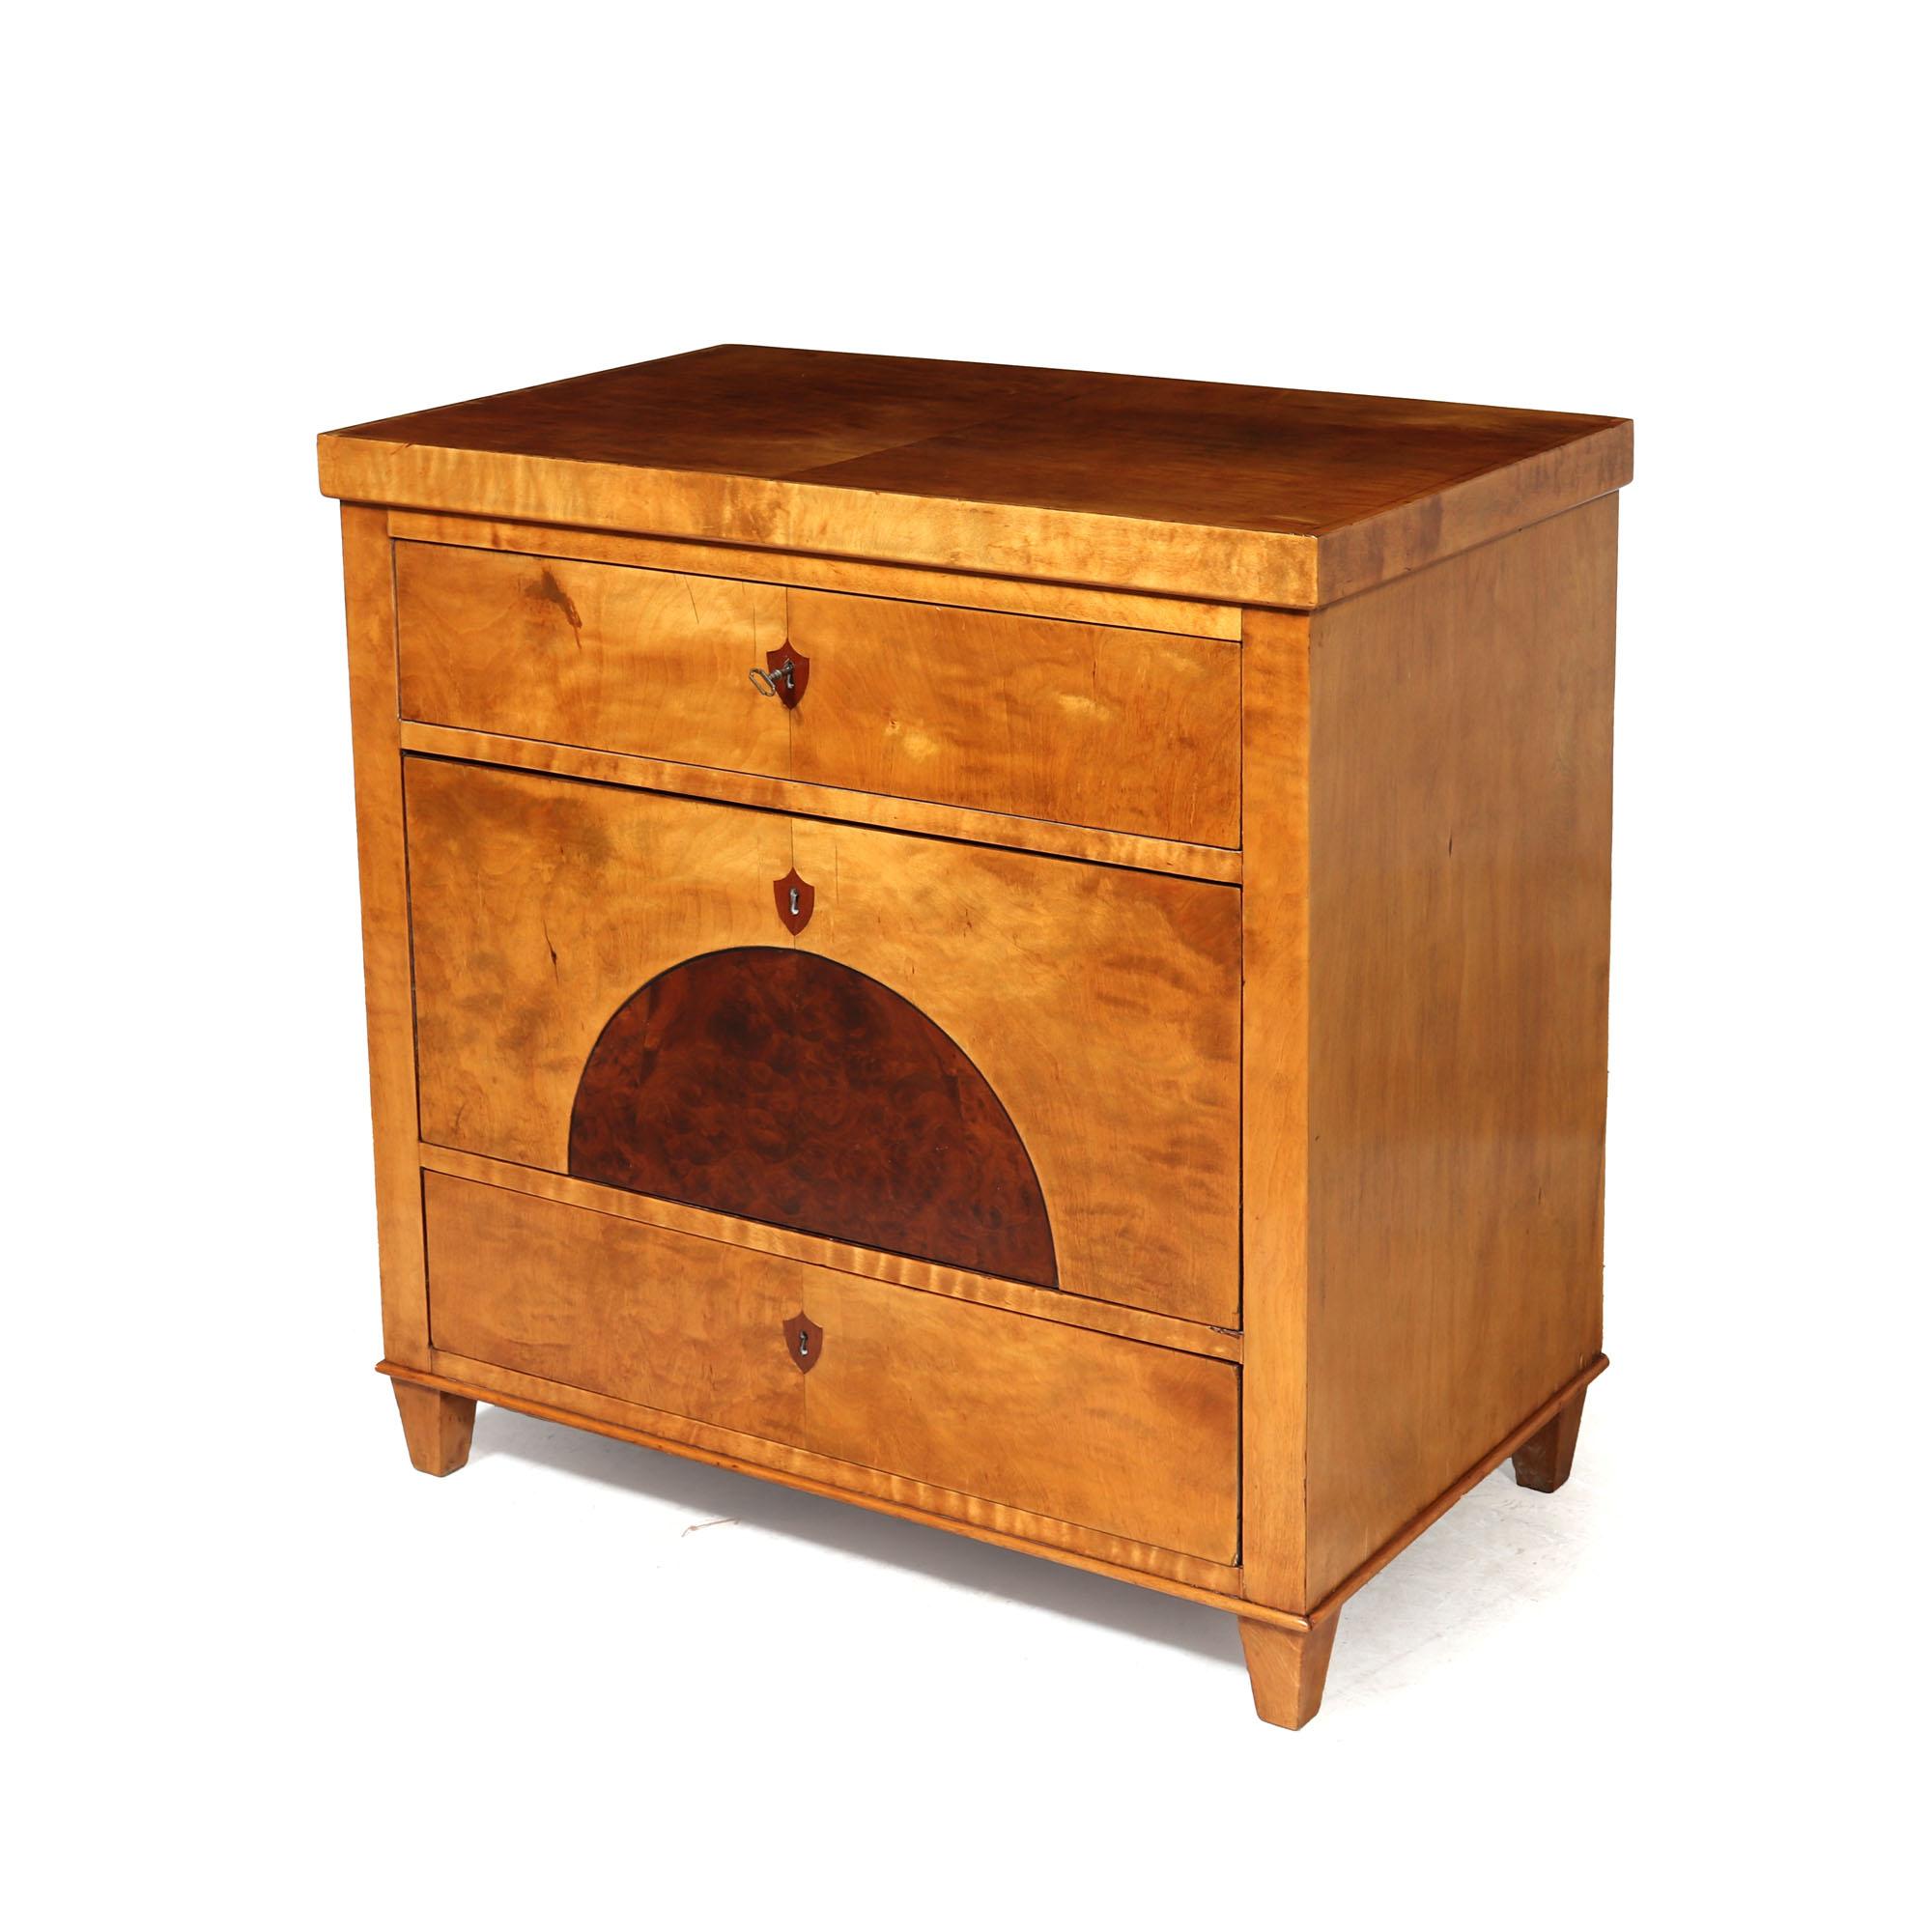 BIEDERMEIER COMMODE 
This exquisite three-drawer commode chest of drawers originates from Austria and dates back to the 1820s. Crafted from pine with a combination of satin birch and half-moon burr walnut veneer detailing, this piece exudes timeless